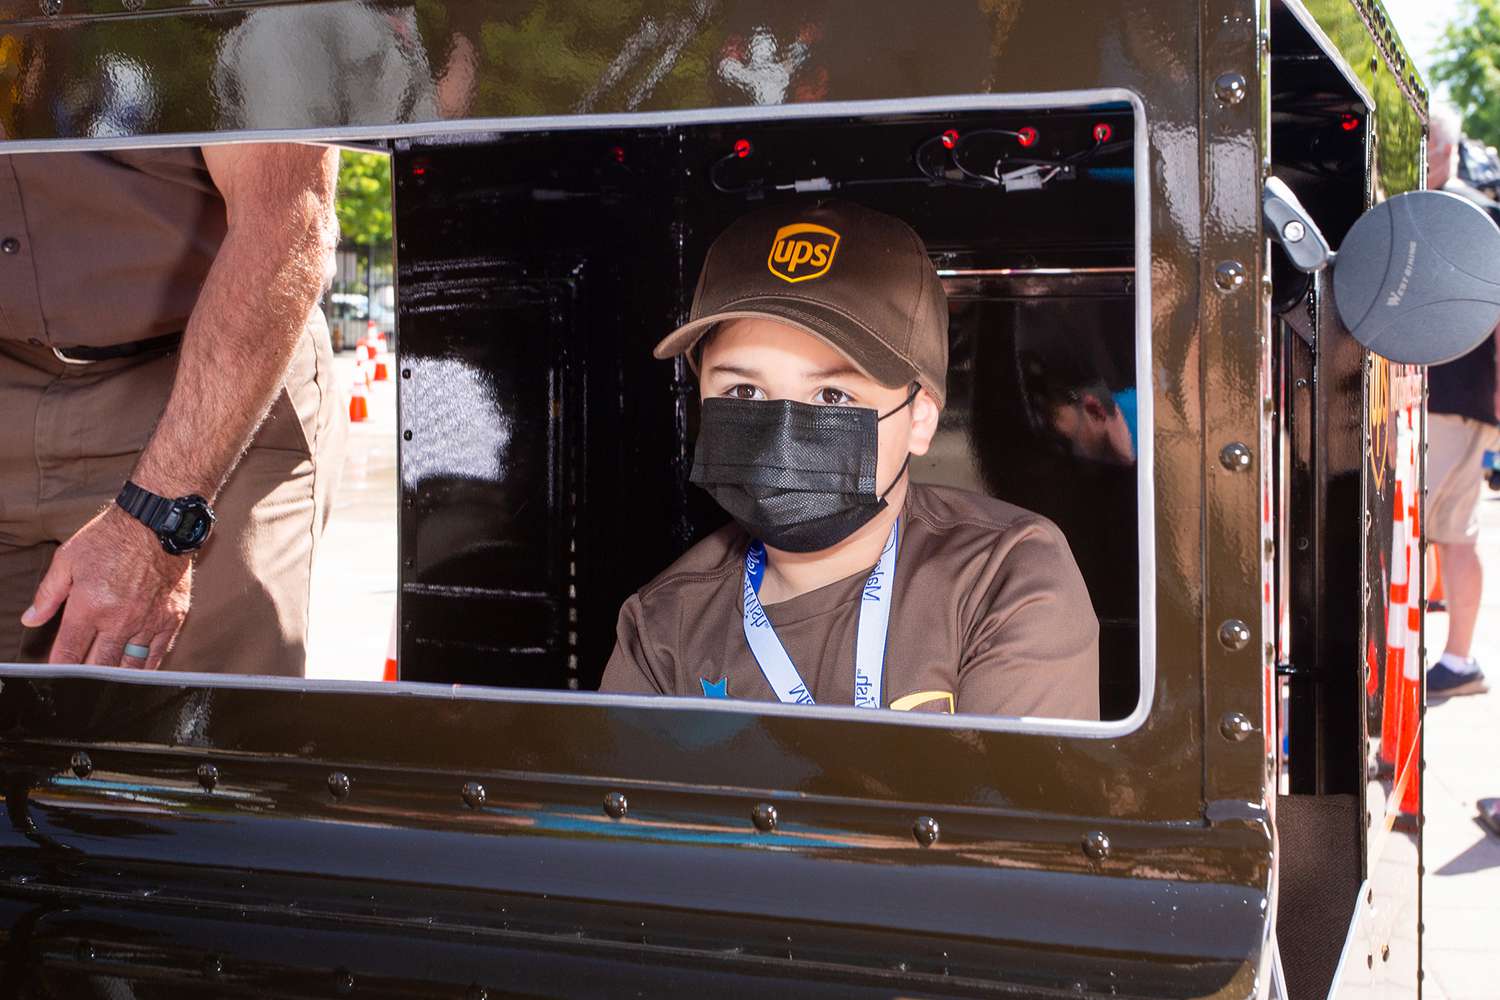 Mateo Toscano — from Stockton, California, who recently had his wish of becoming a UPS driver come true